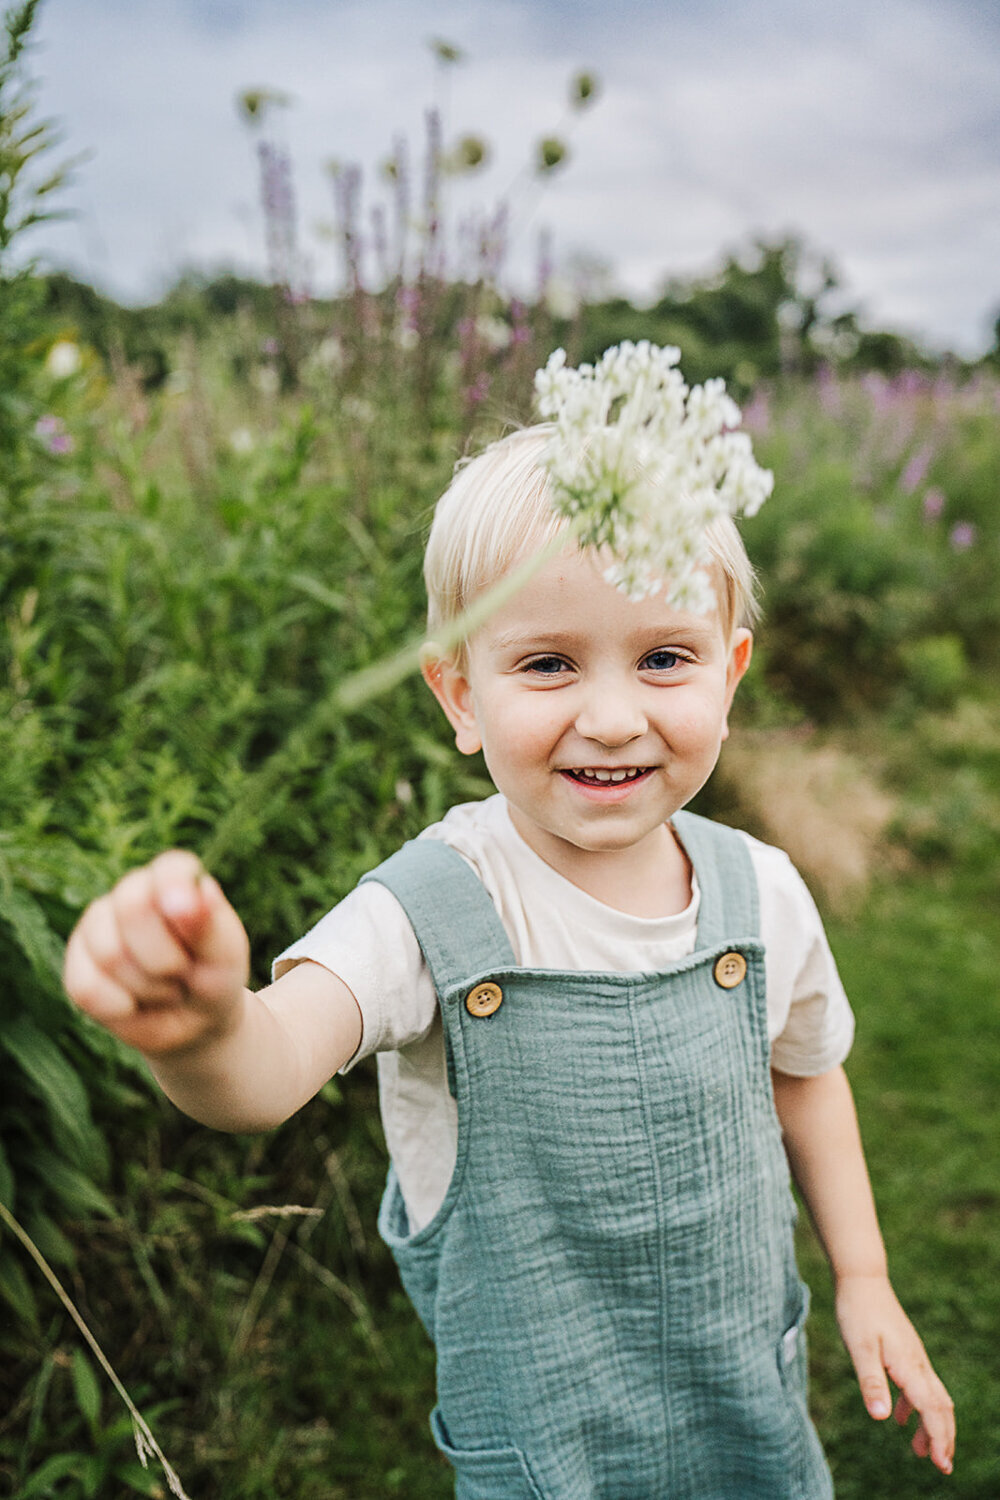 toddler boy waves queen annes lace at camera while smiling